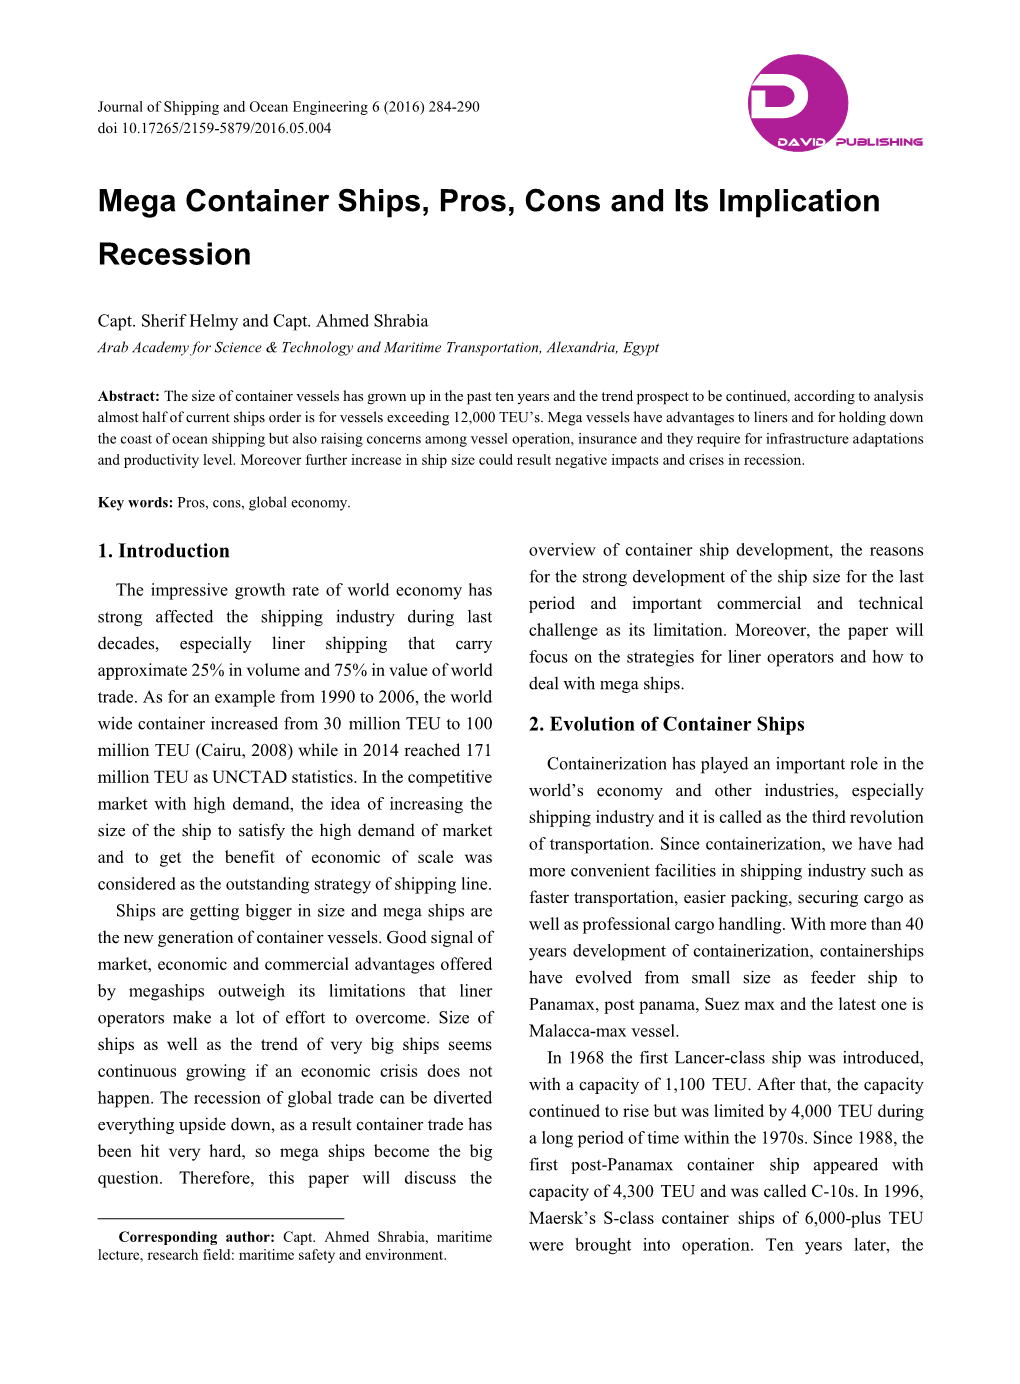 Mega Container Ships, Pros, Cons and Its Implication Recession